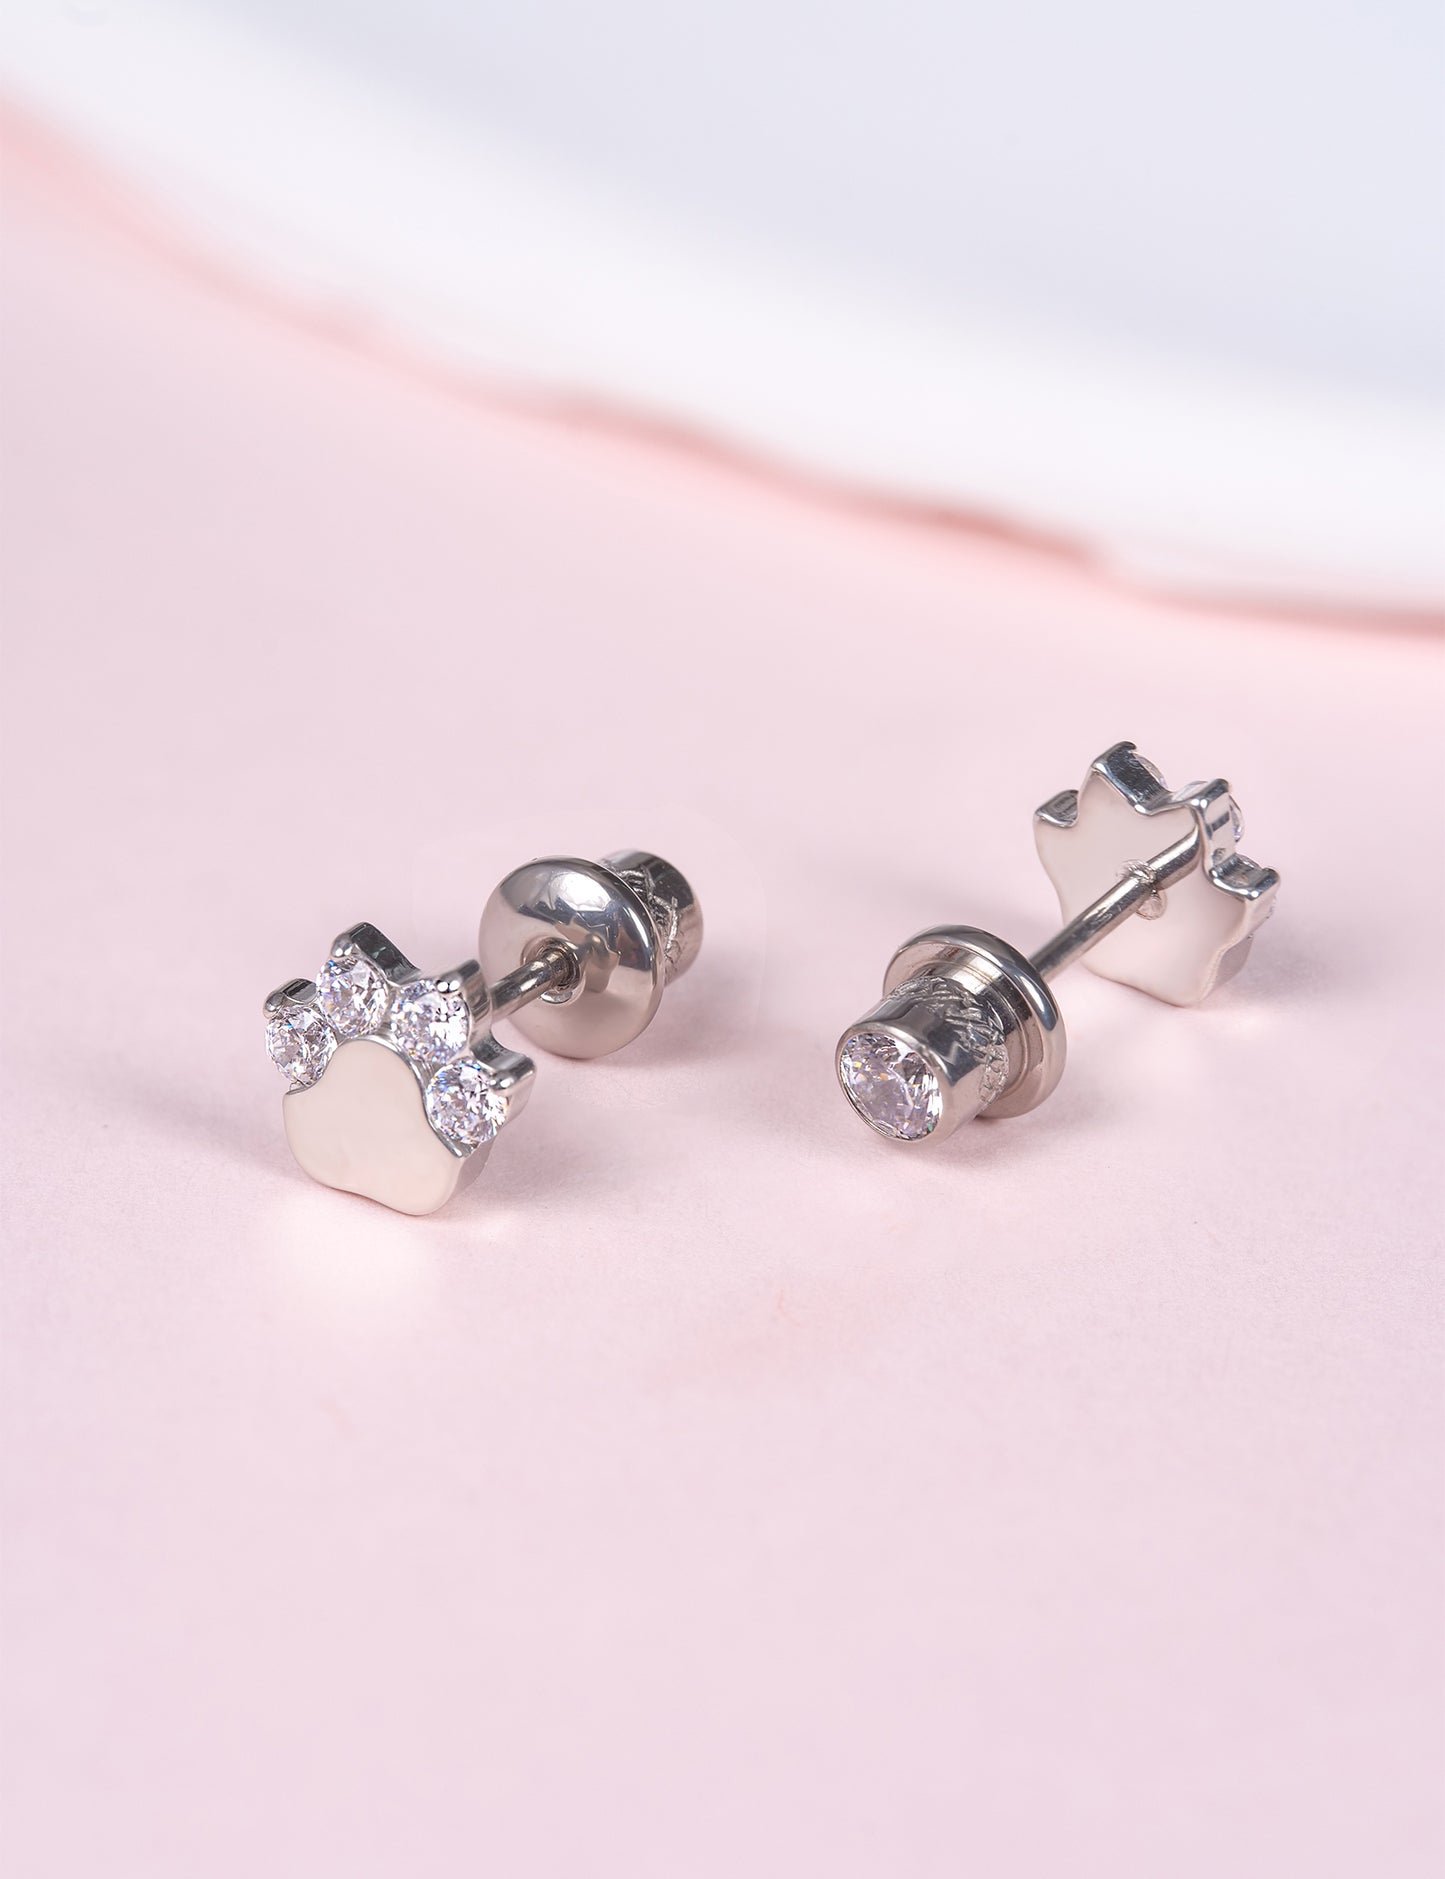 limerencia Hypoallergenic G23 Implant Grade Titanium Screw Back Earrings Tragus 20G Helix F136 Piercing Post for Girls' Sensitive Ears Cartilage- Cat Paws CZ